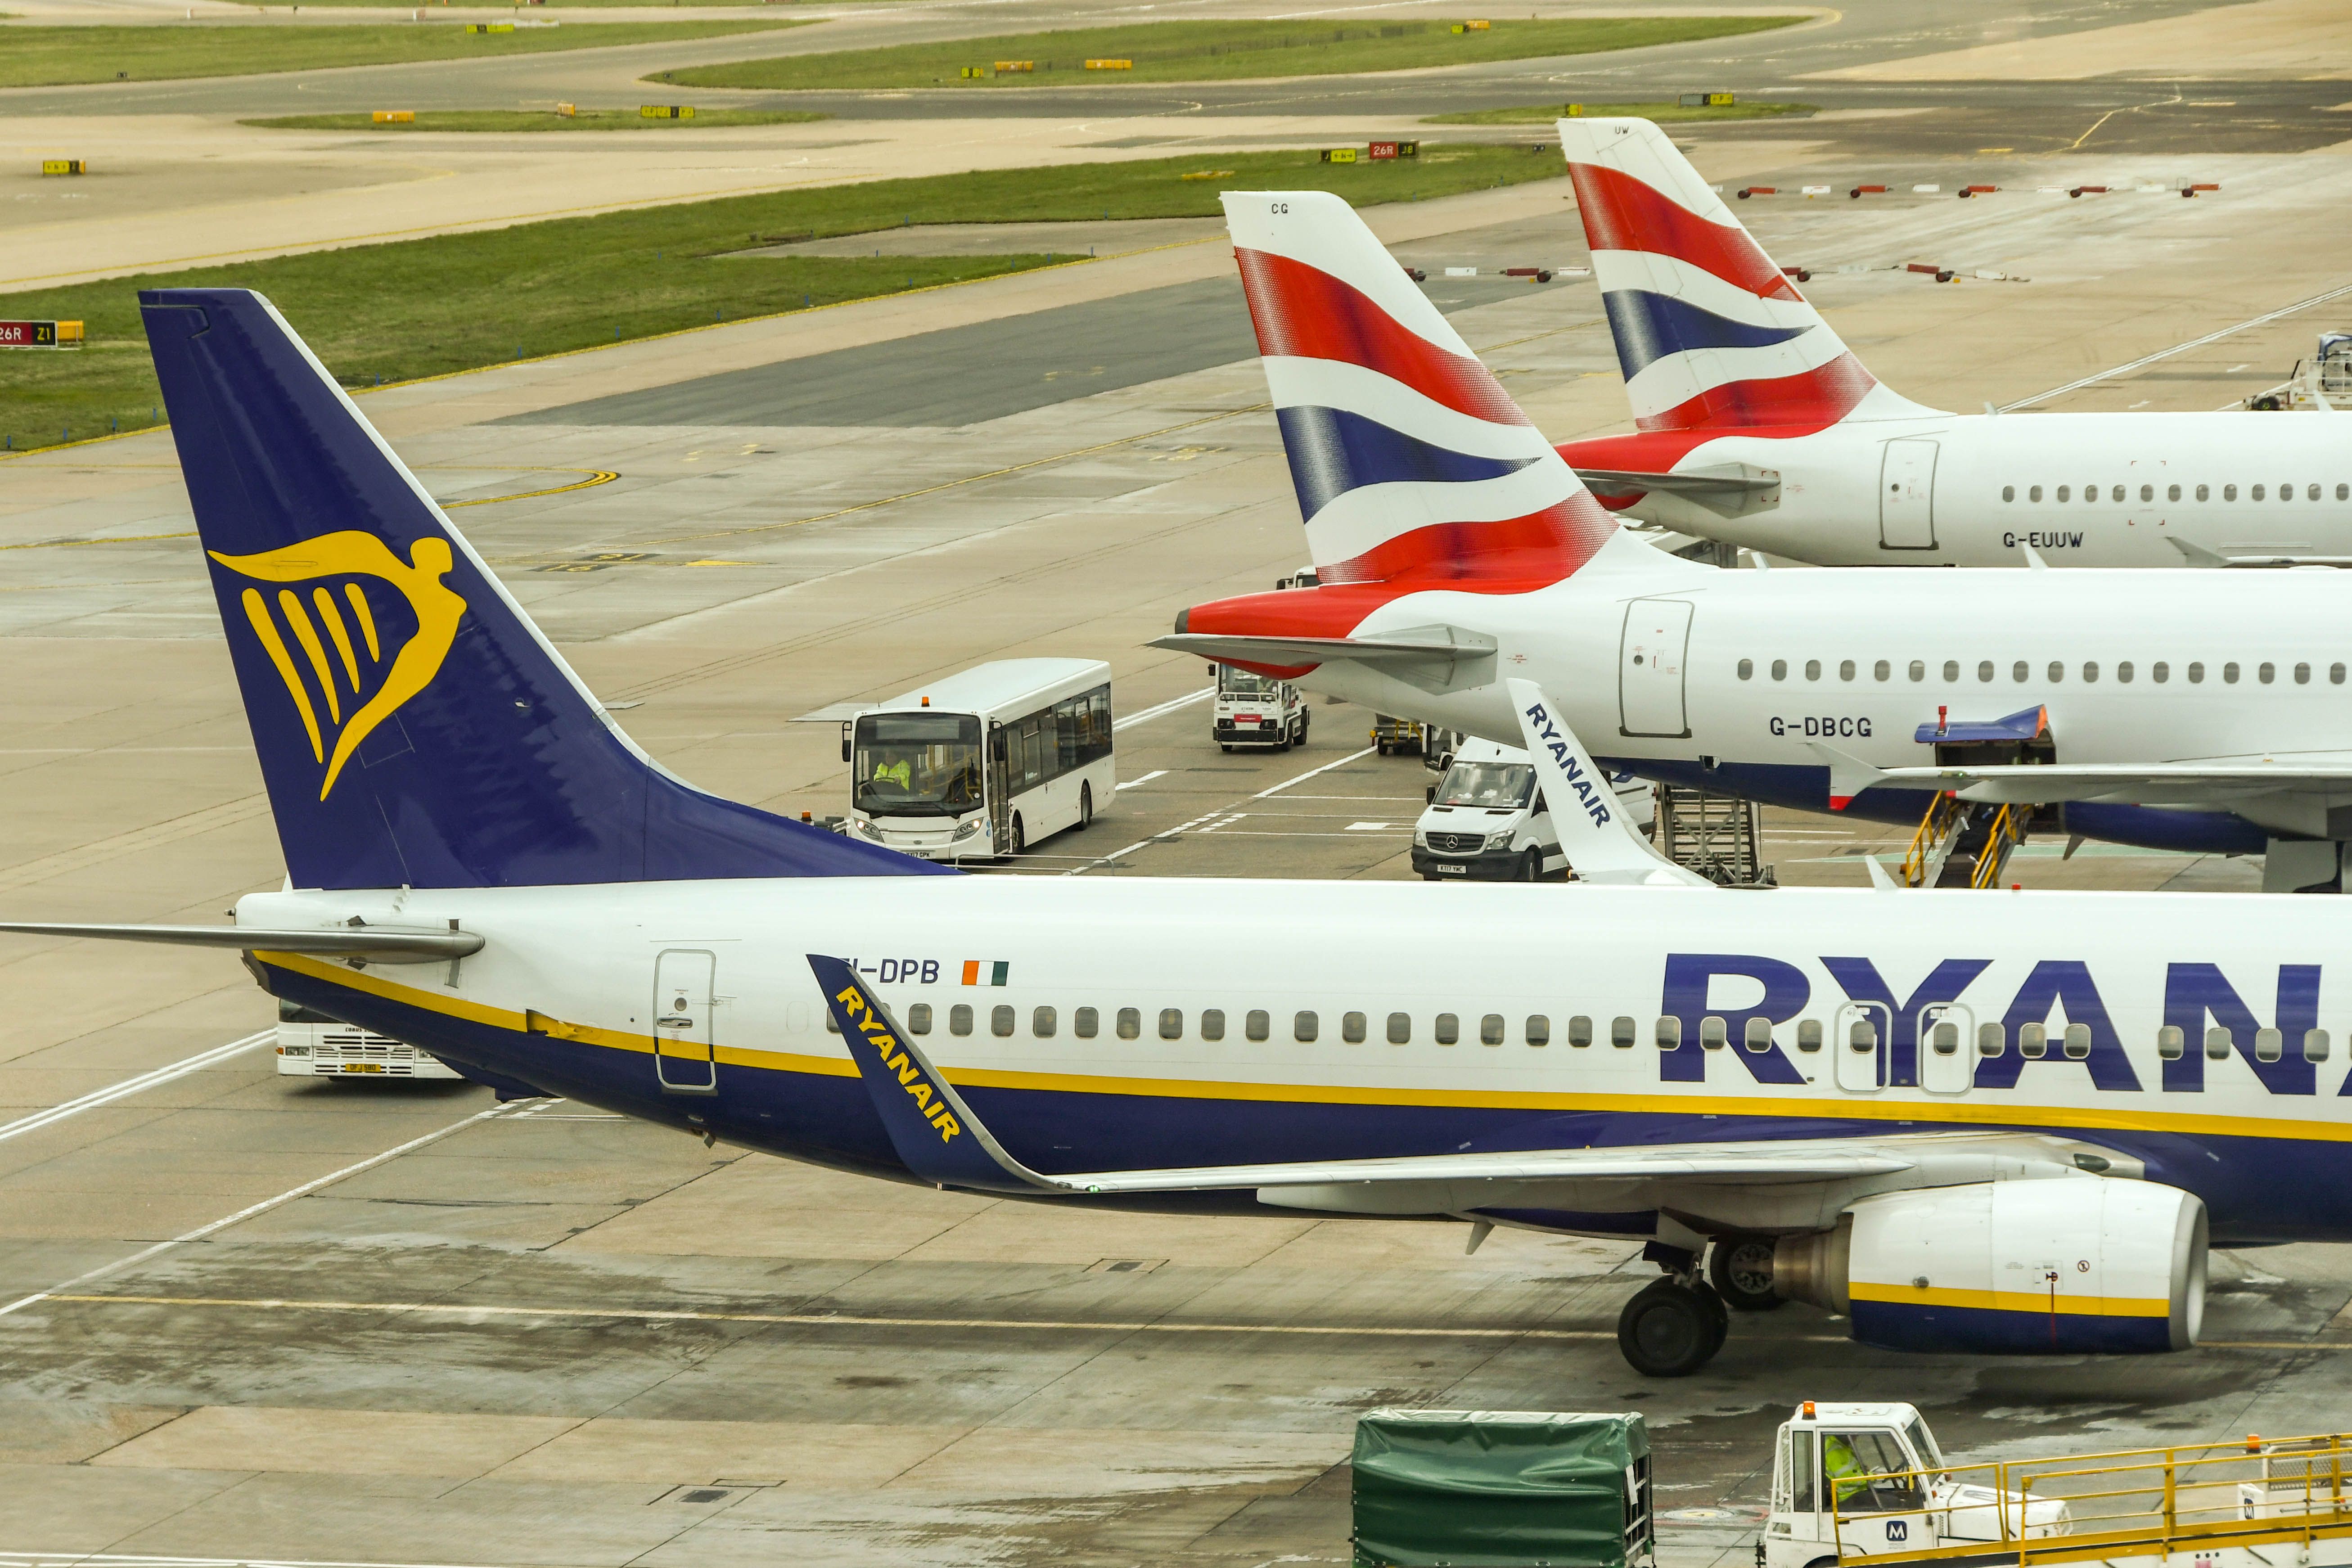 A Ryanair Boeing 737 parked alongside a British Airways jet at London Gatwick Airport.